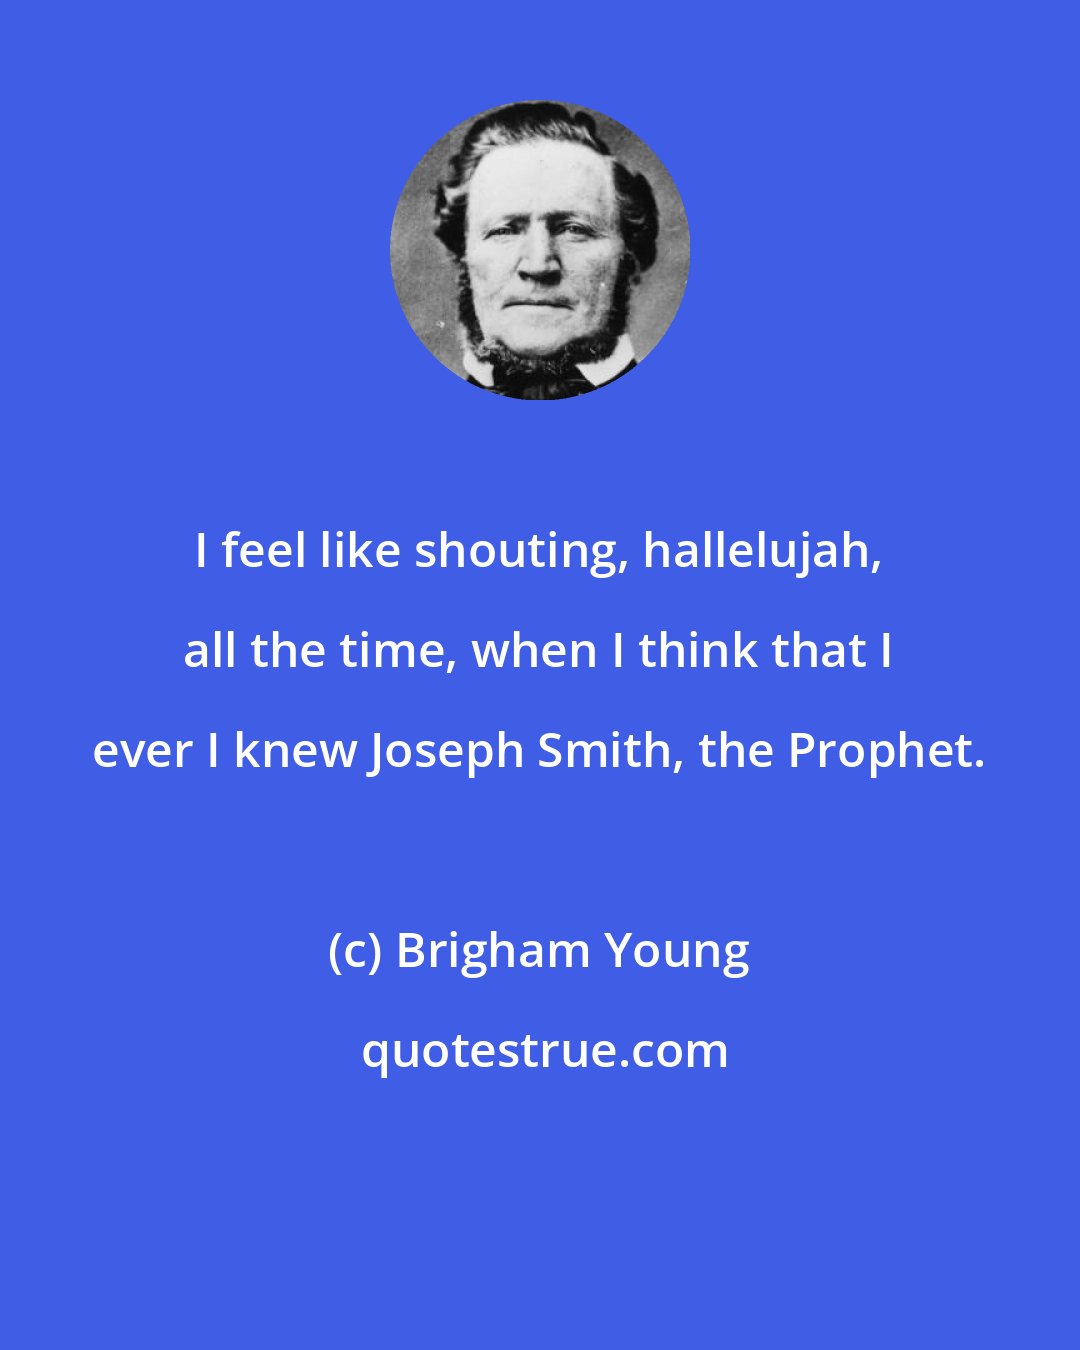 Brigham Young: I feel like shouting, hallelujah, all the time, when I think that I ever I knew Joseph Smith, the Prophet.